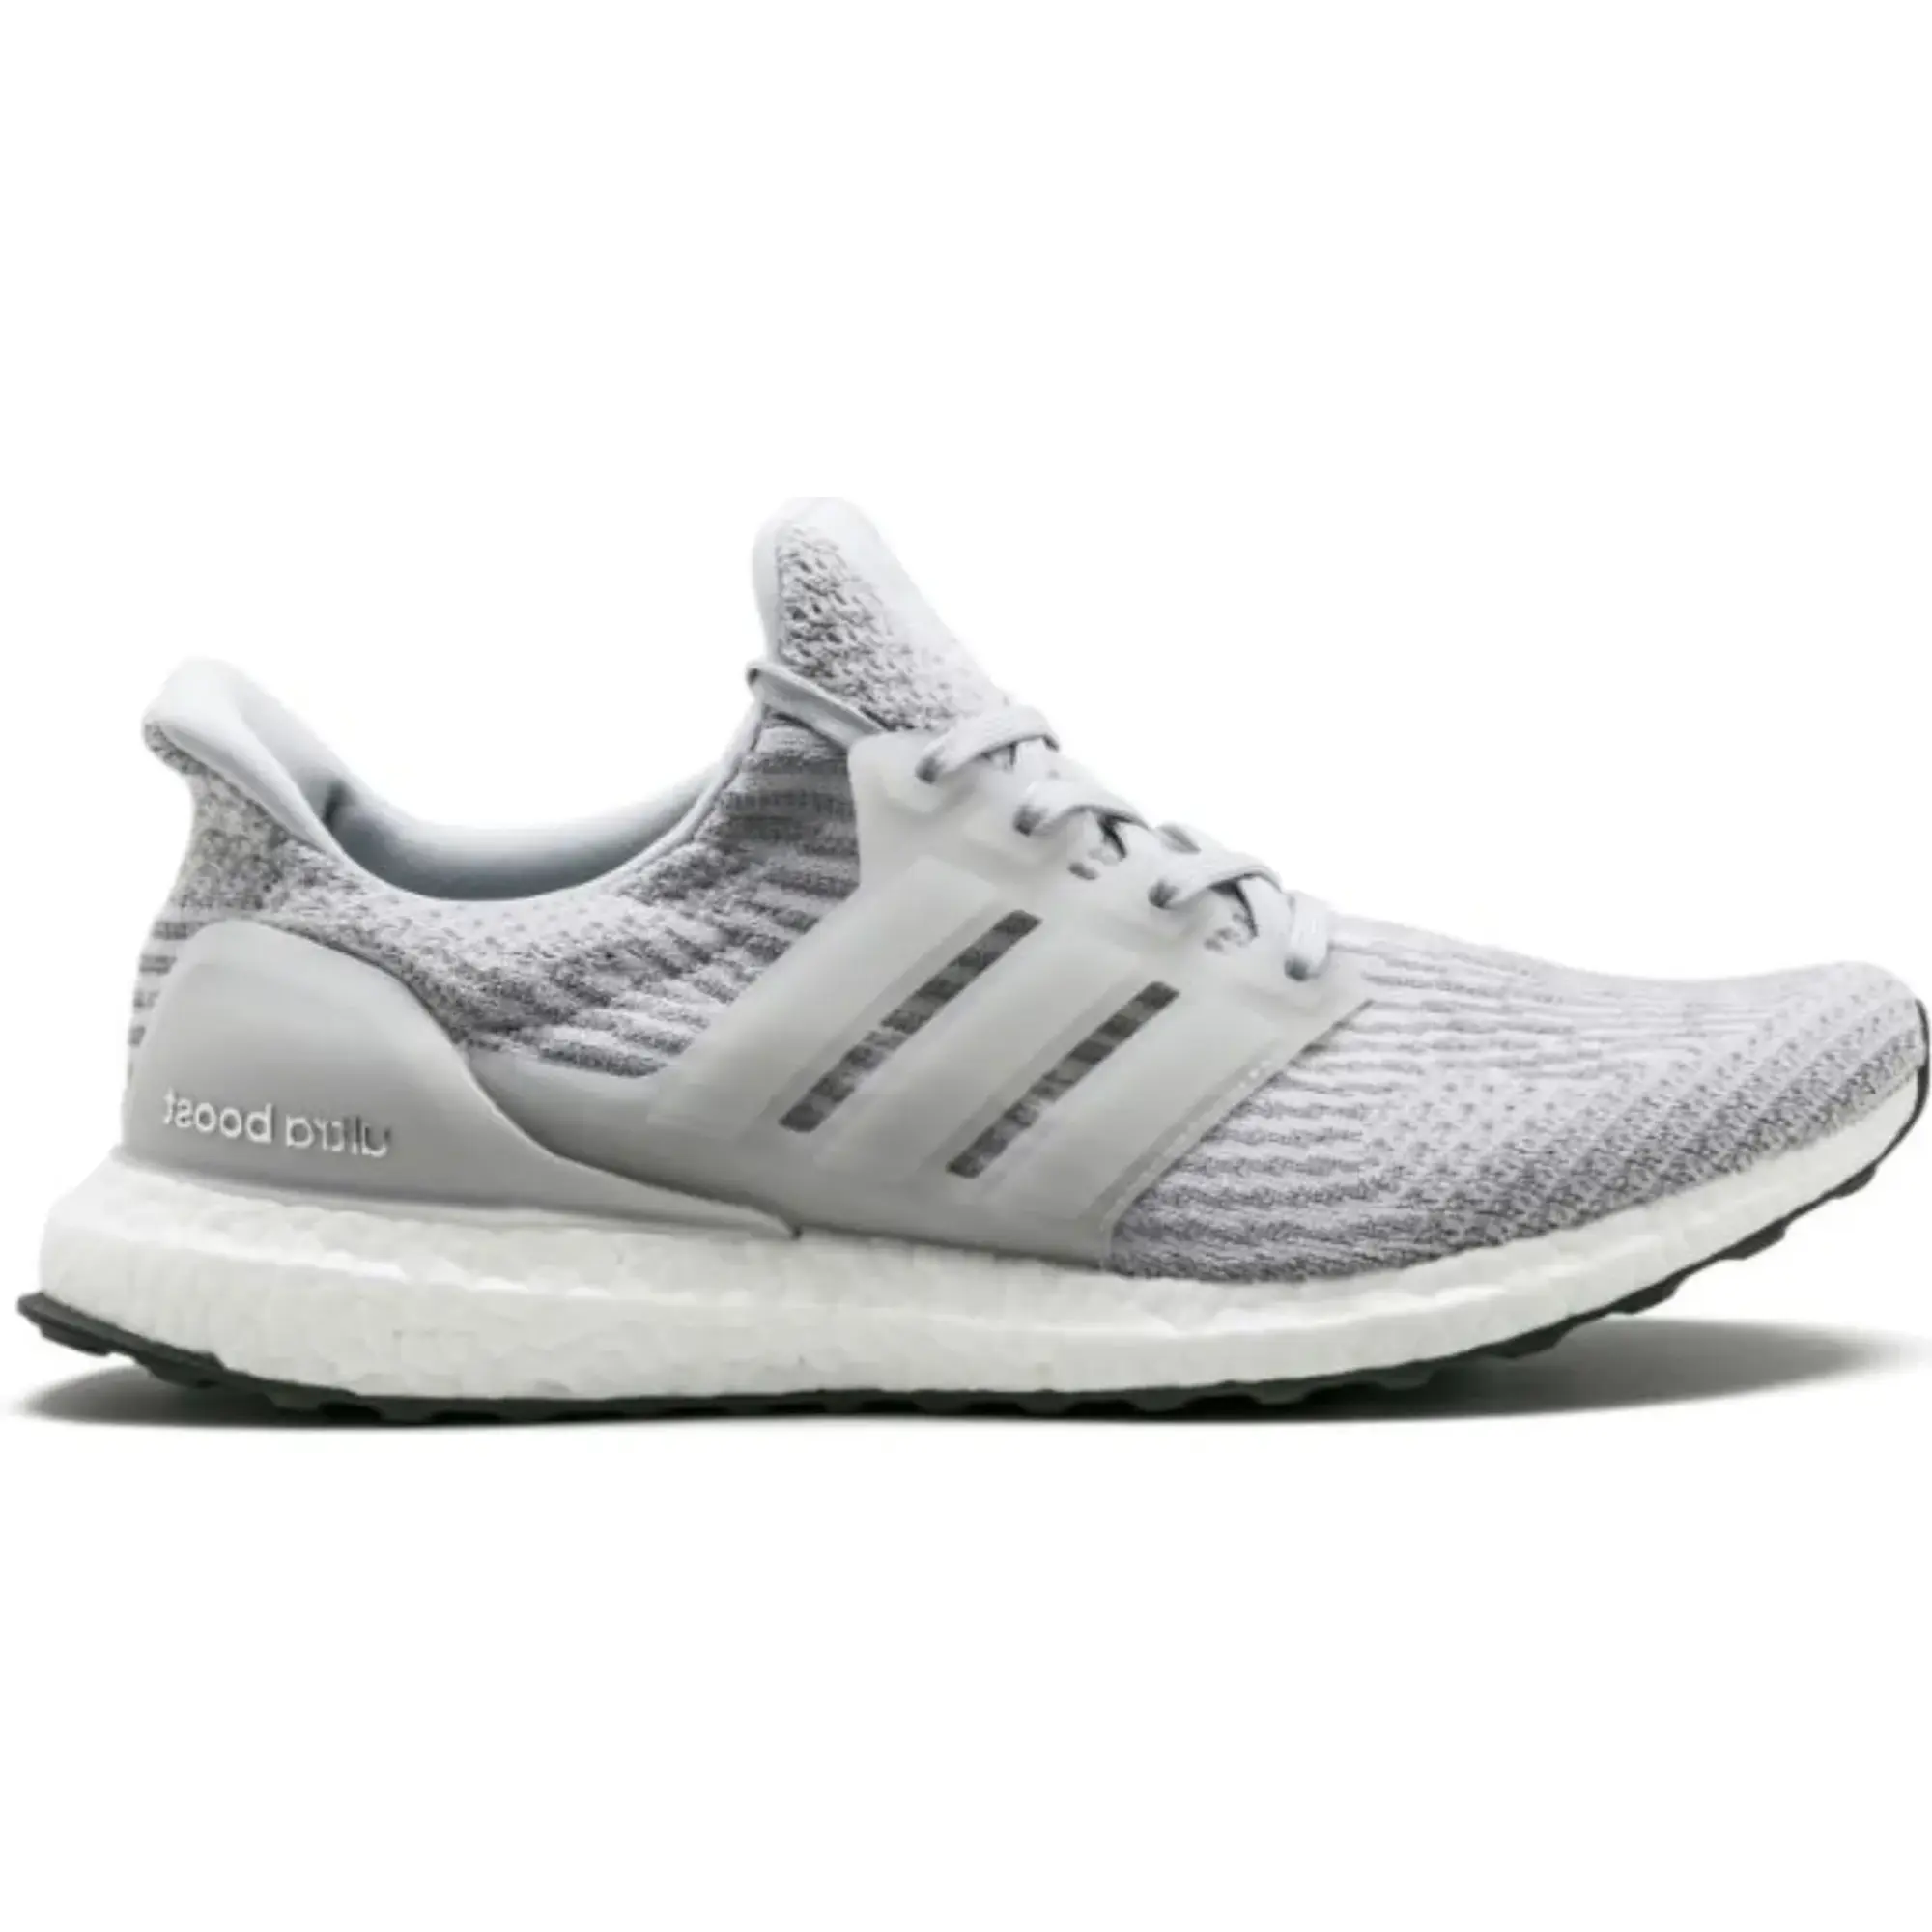 adidas UltraBoost Boost 3.0 Shoes